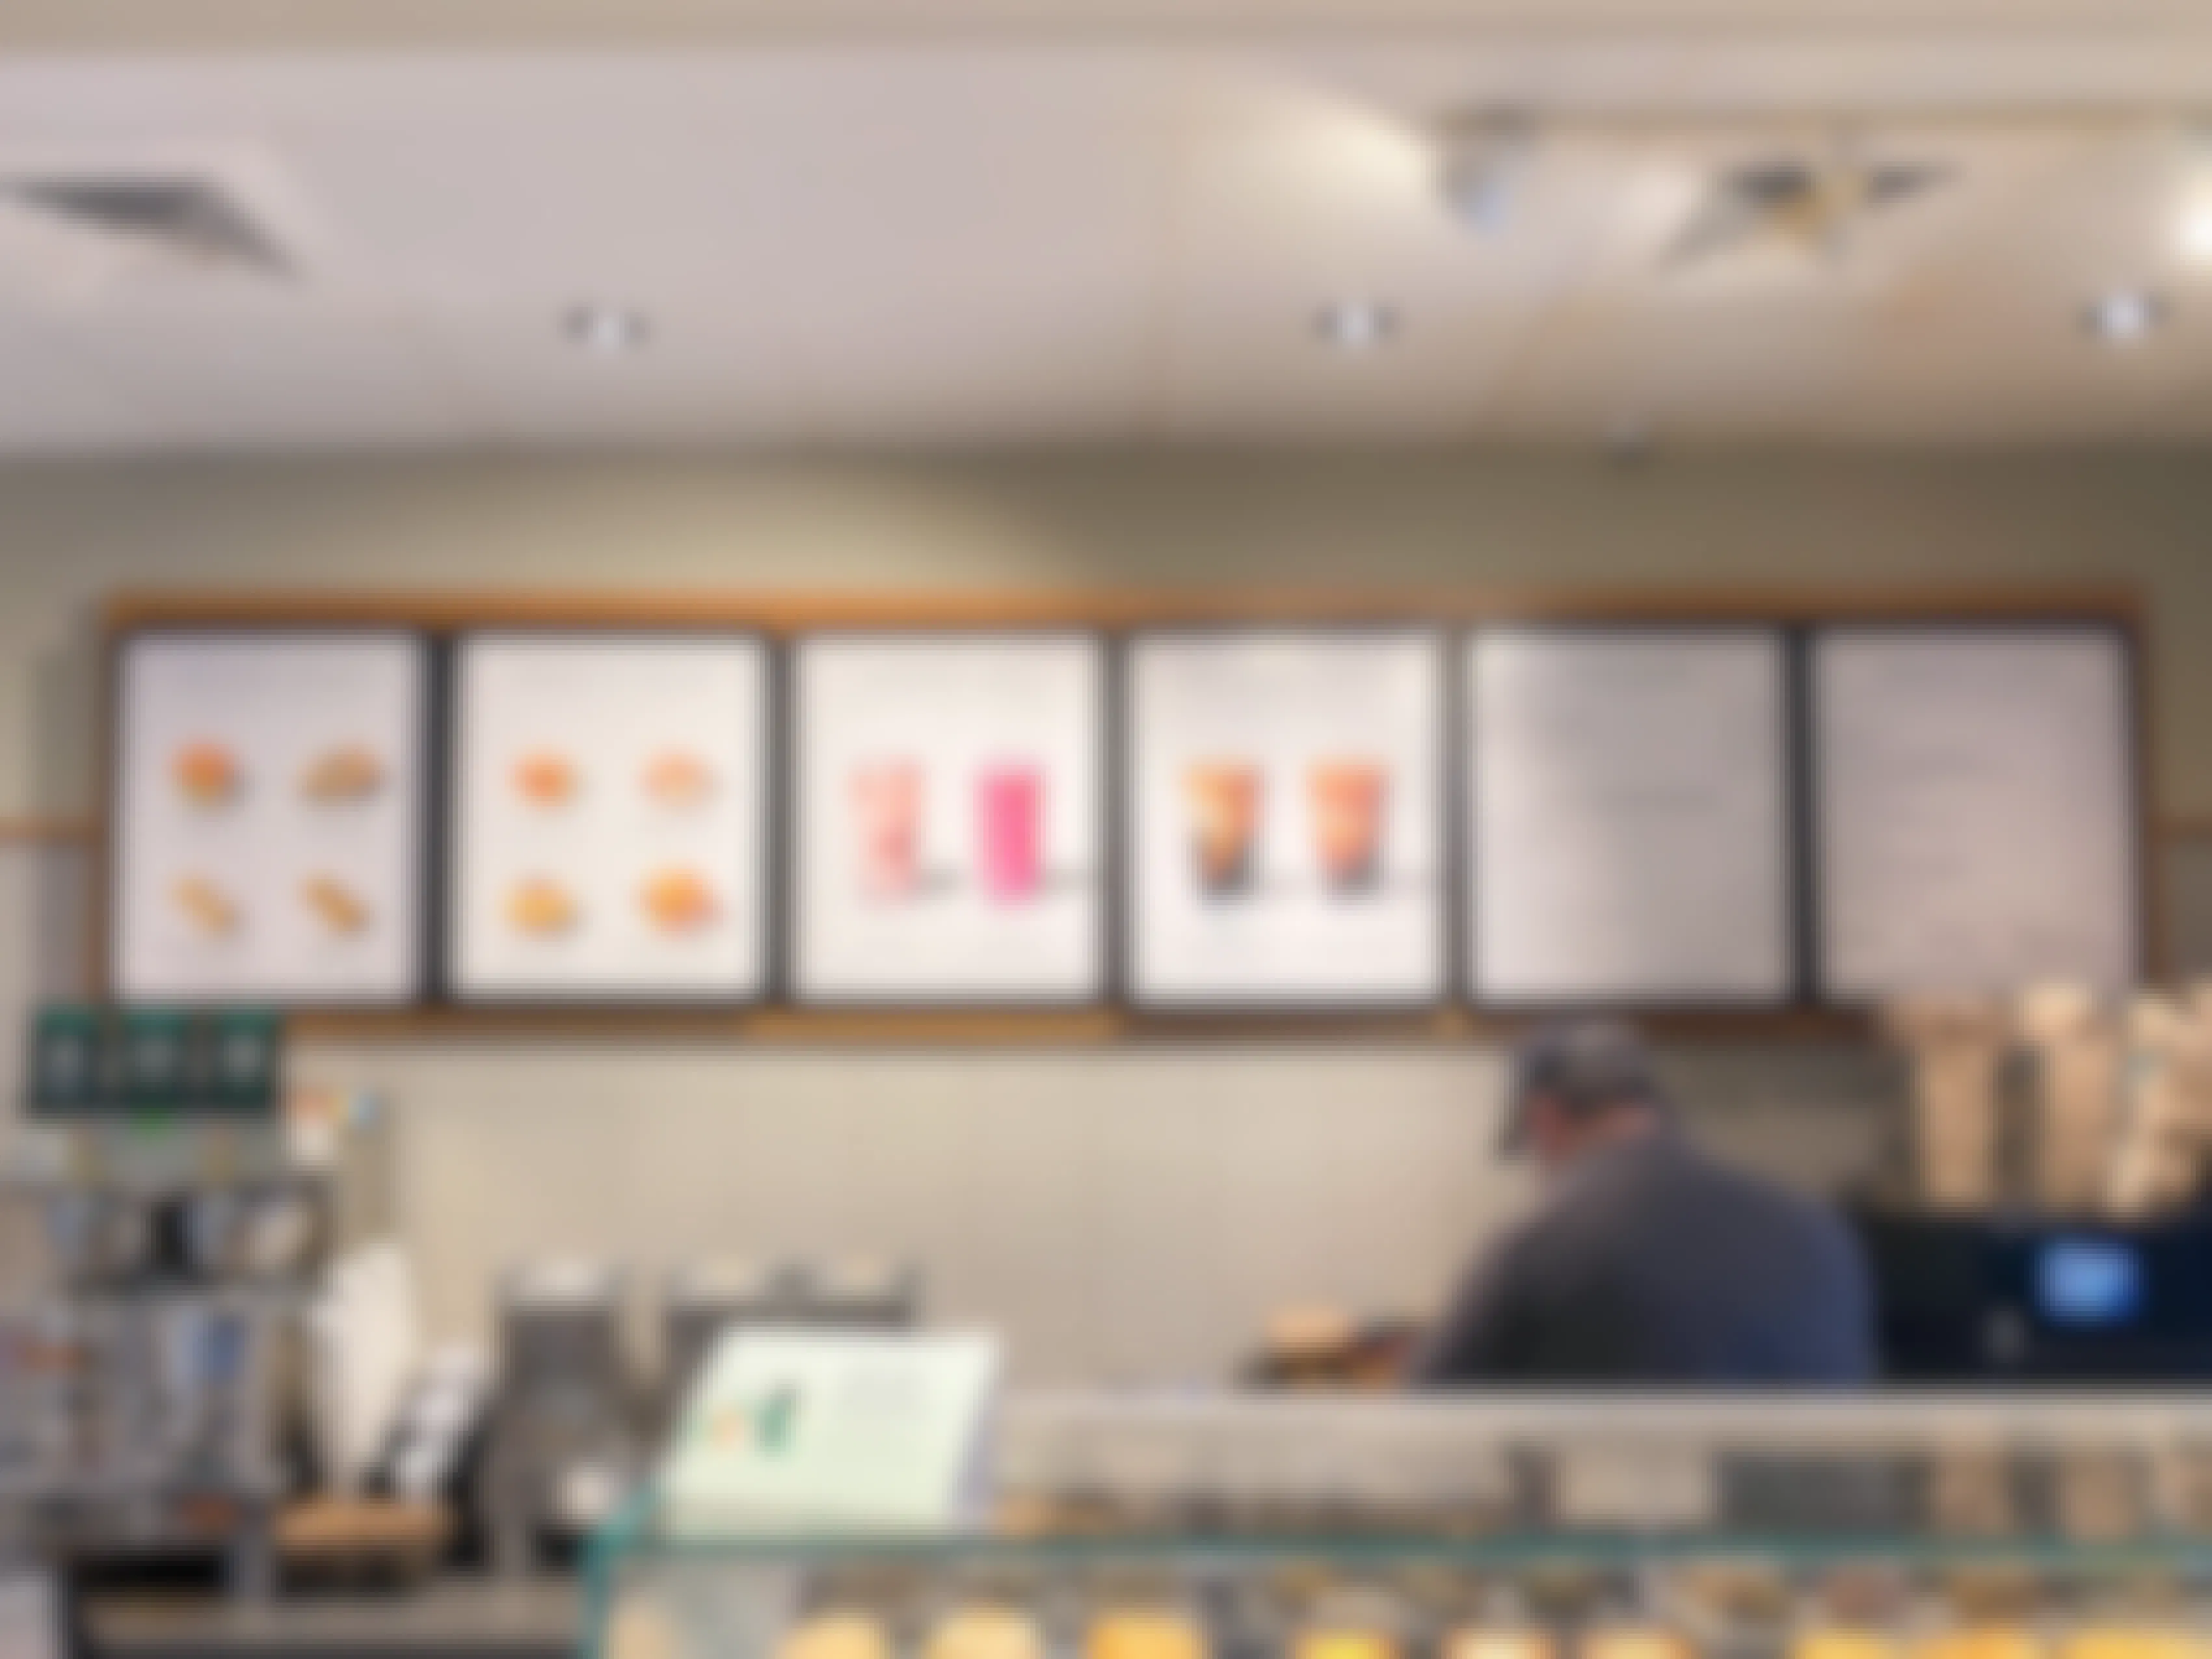 The Starbucks menu on the wall behind the counter, above a Starbucks employee who is working.